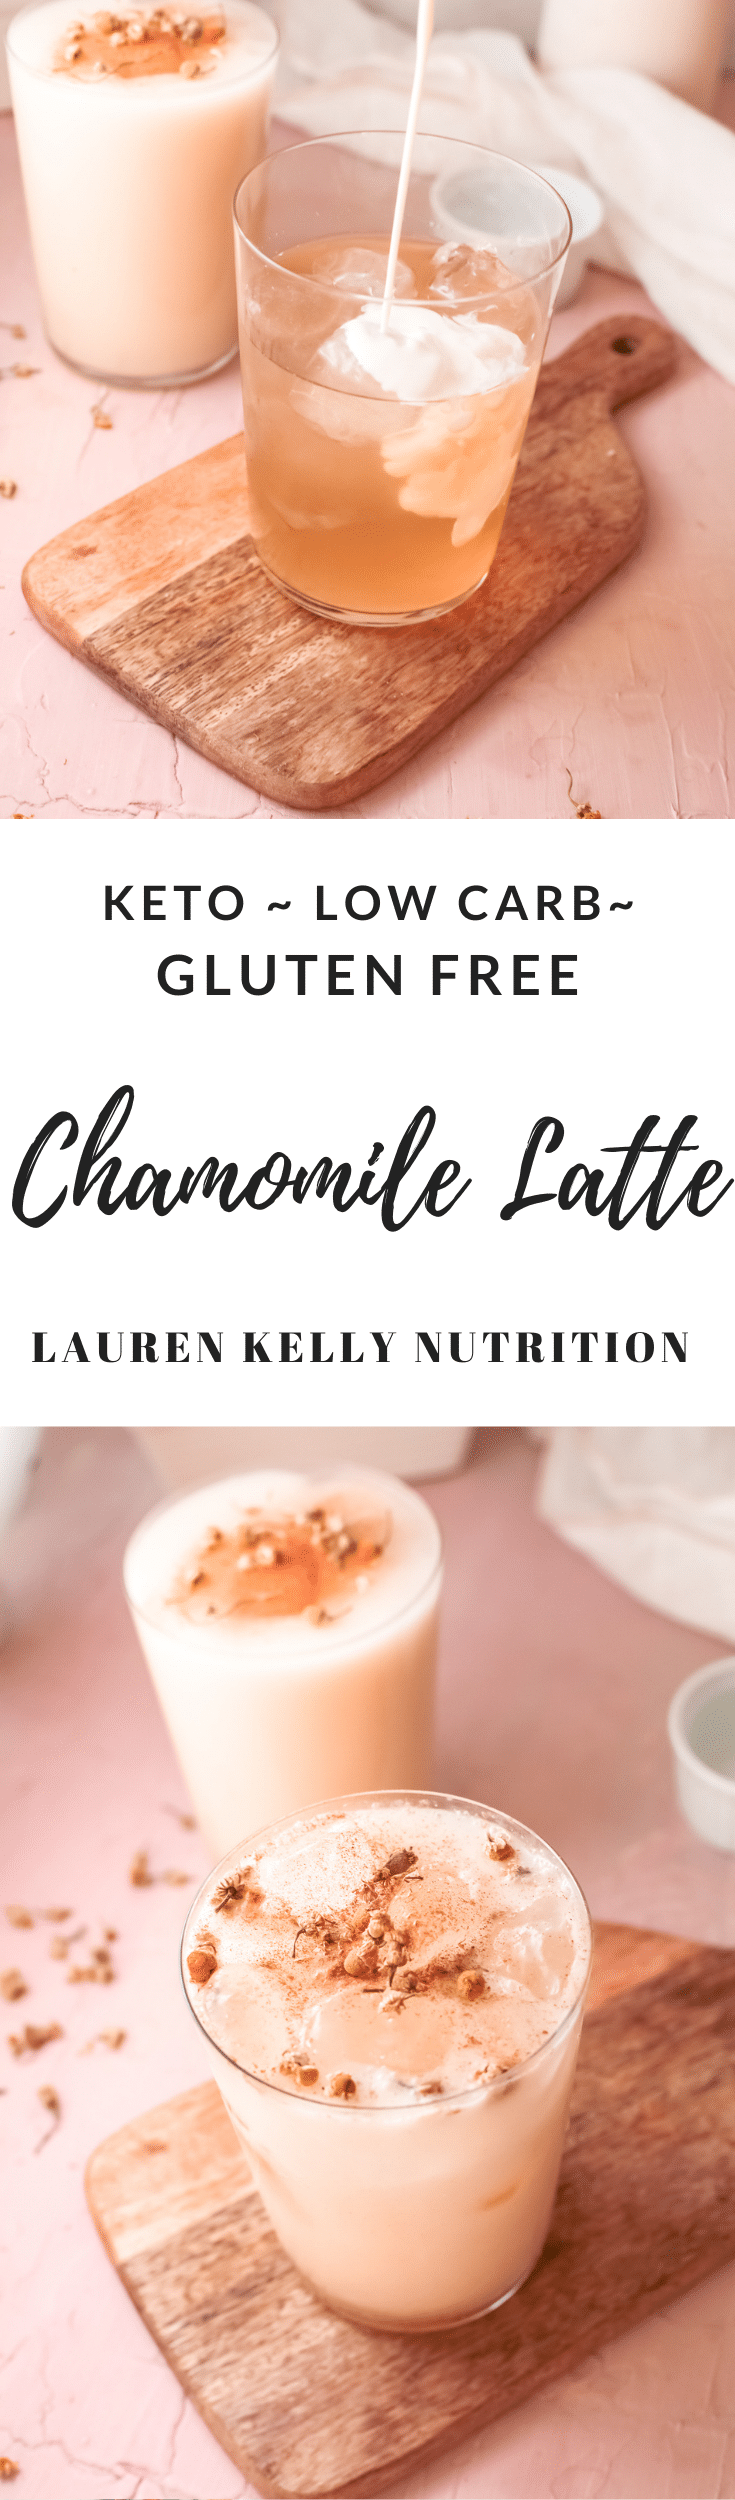 Healthy Chamomile Latte only needs 5 simple ingredients and will be ready in 10 minutes. Its sugar free, low carb, gluten free and delicious.